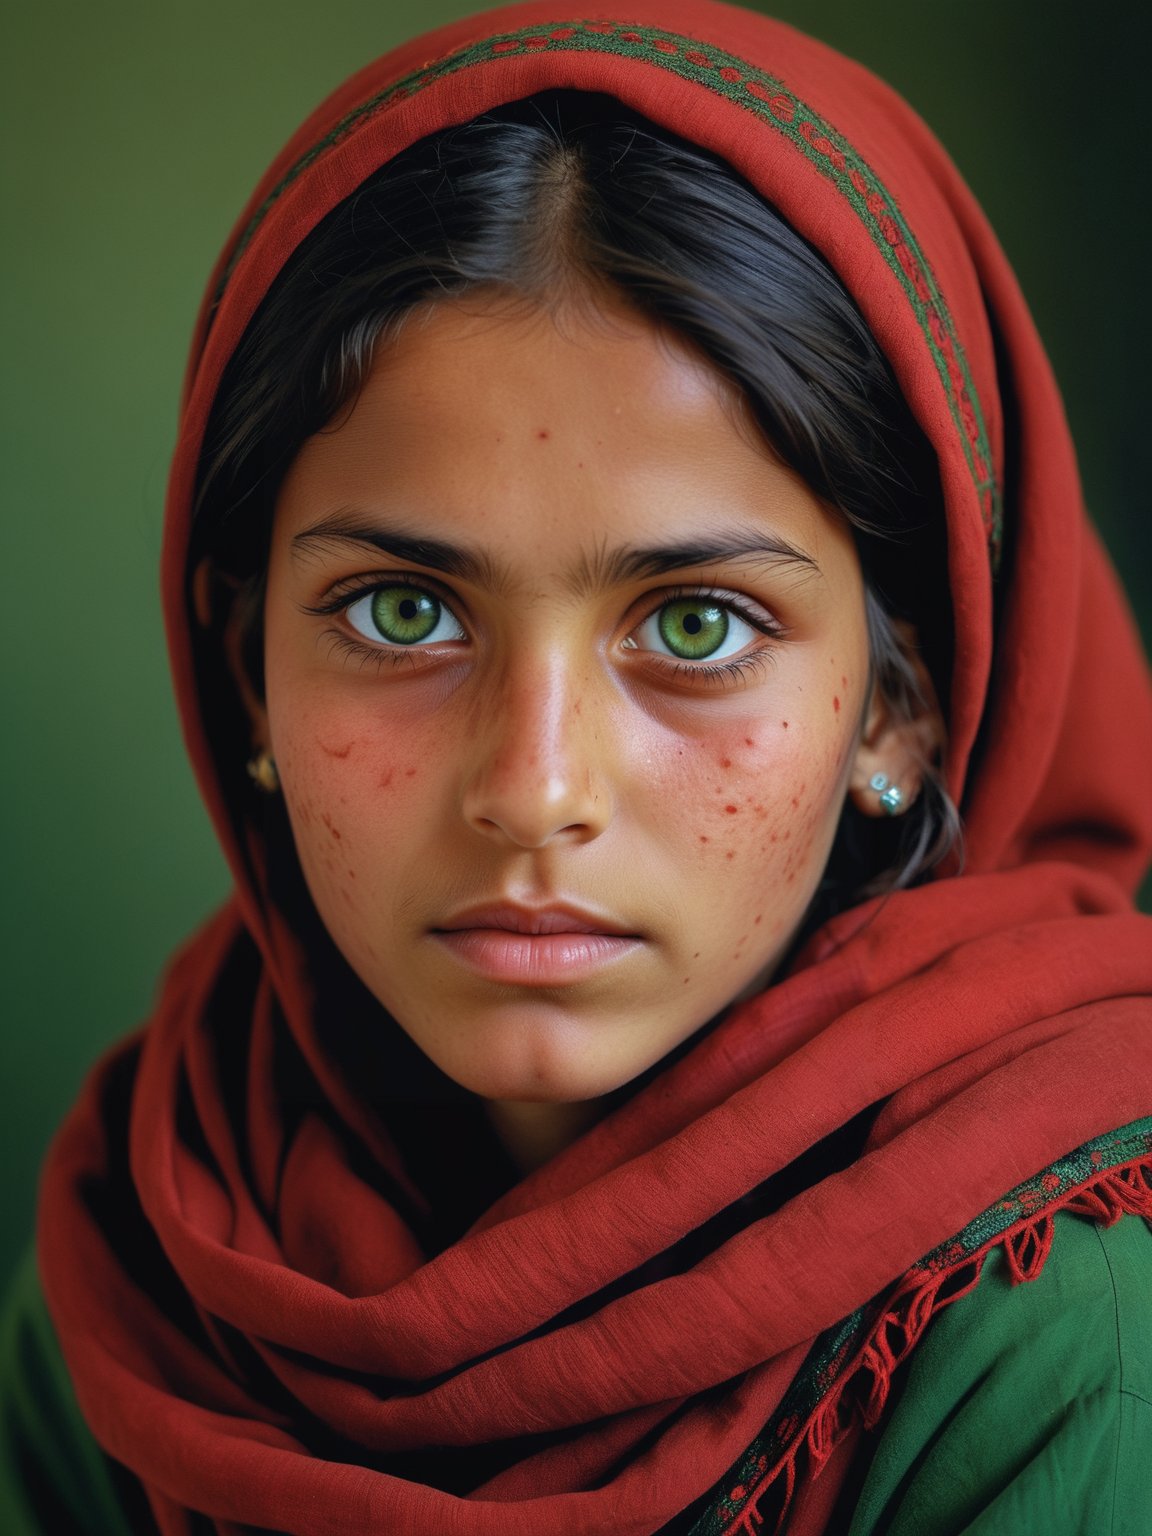 realistic photograph, nobel prize, portrait of an afghan girl with piercing green eyes, wearing a red scarf, looking at viewer, highly detailed, skin pores, detailed skin, national geopgraphic, dark and gritty, sitting, looking to the side at viewer, turning head, gritty, film grain, 